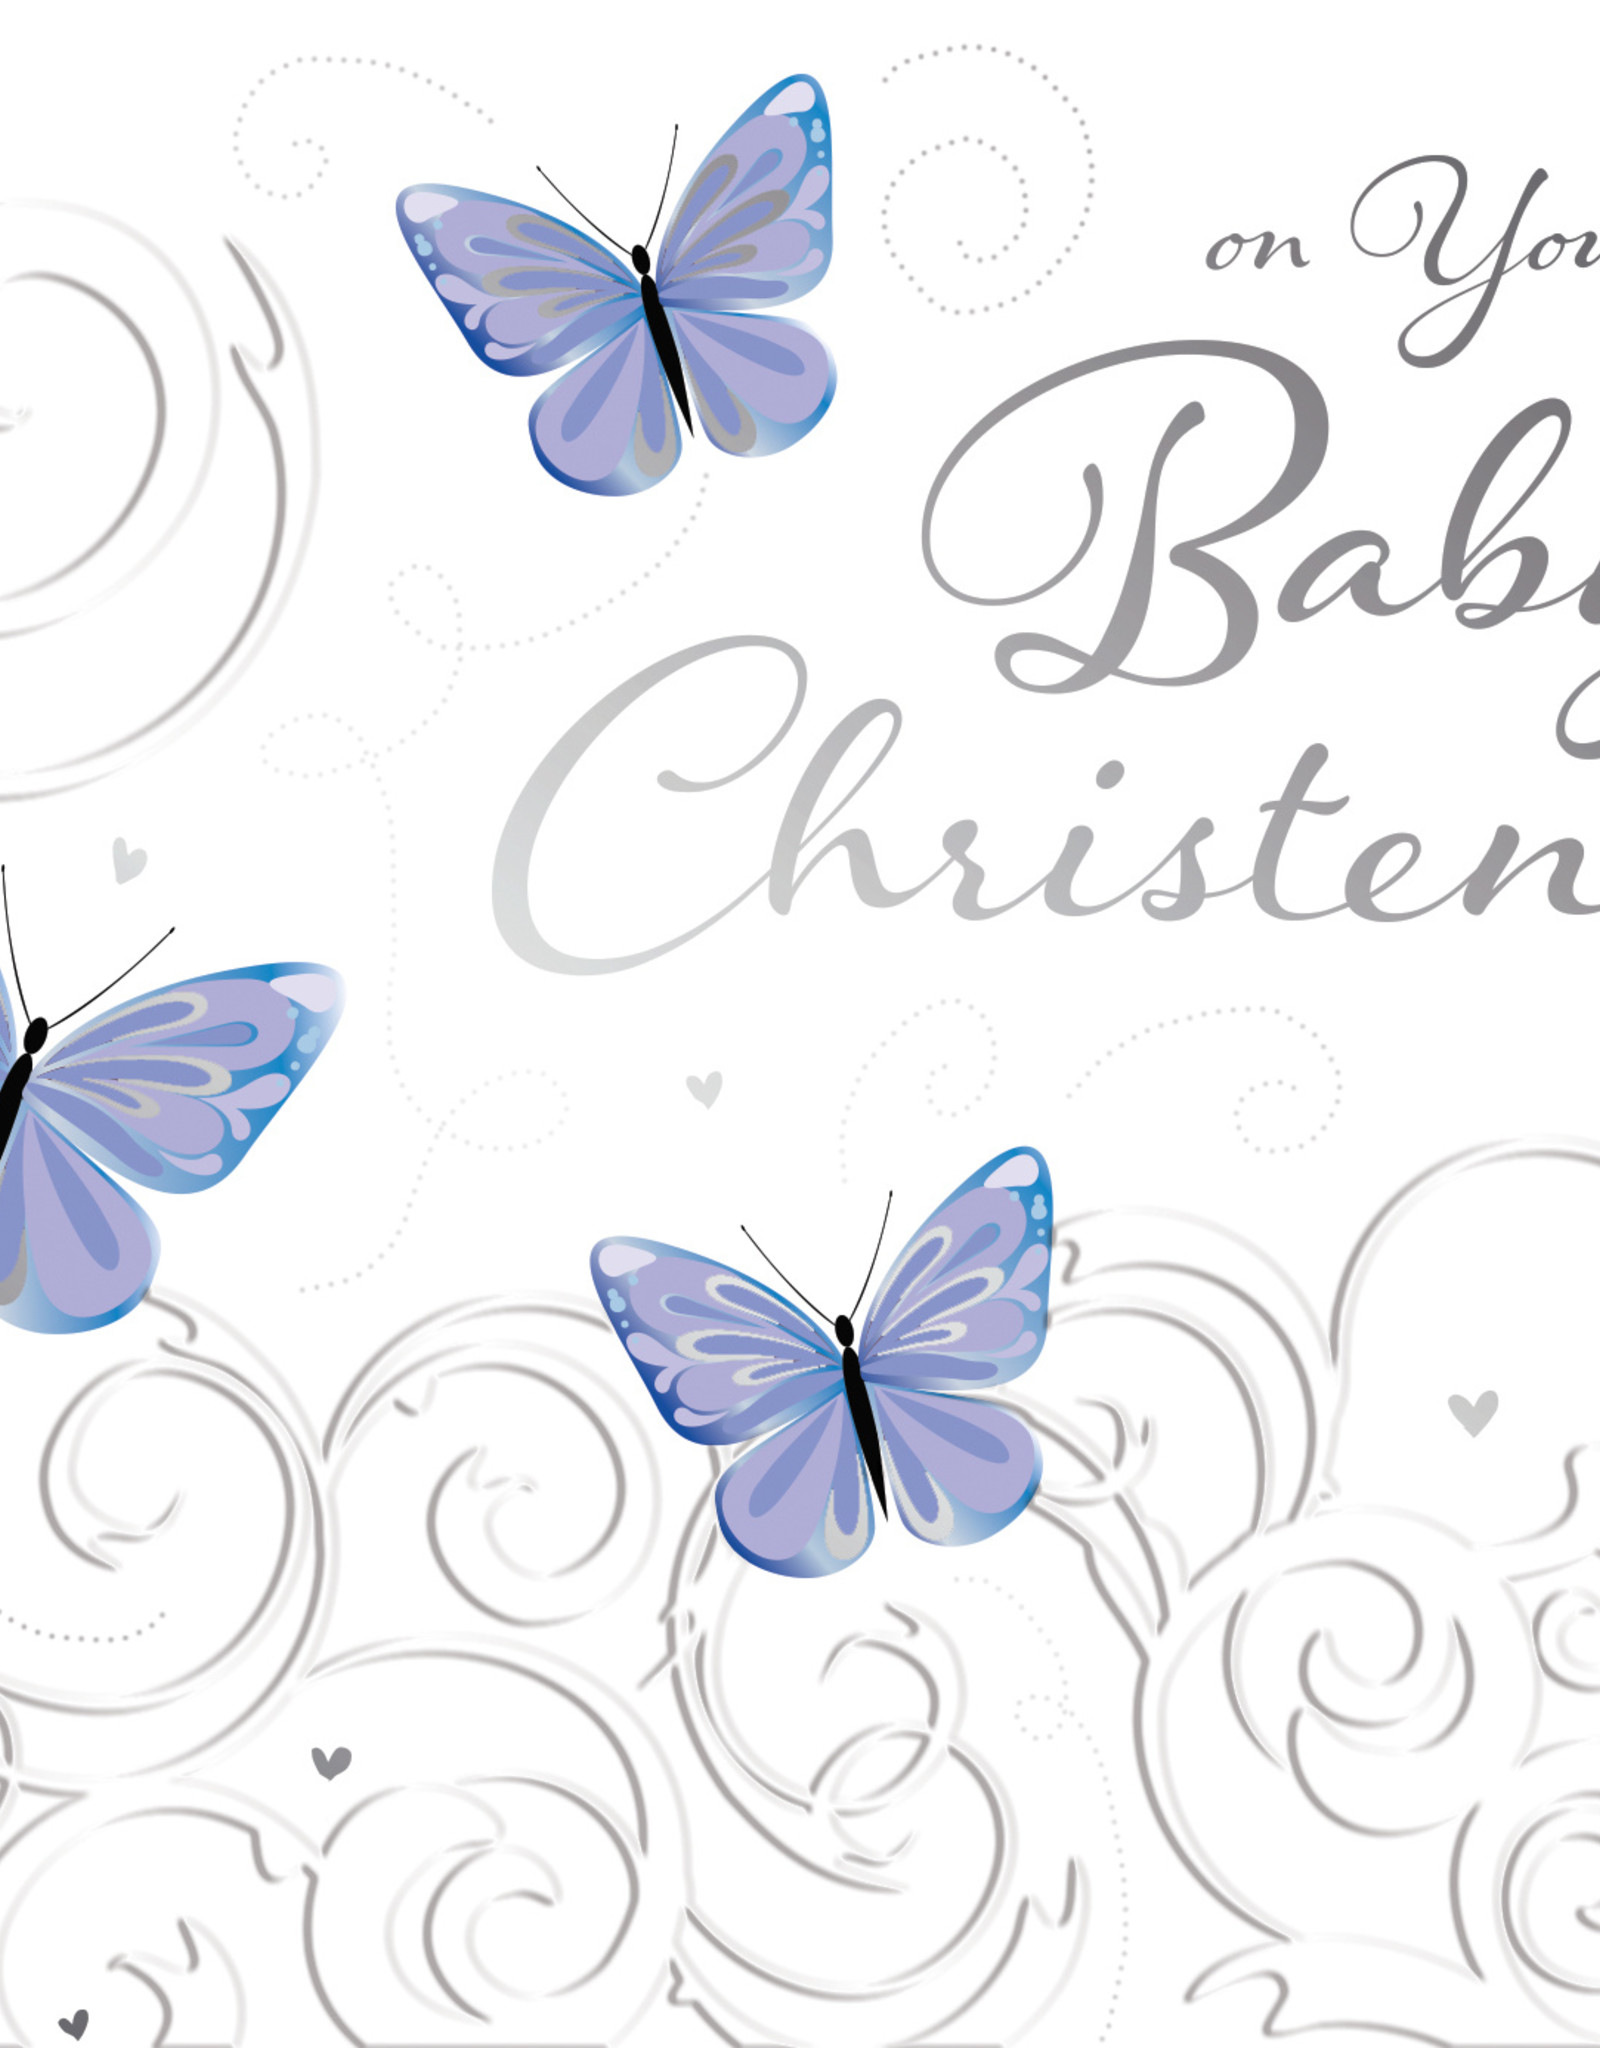 Pictura Pictura - Christening Card 60989